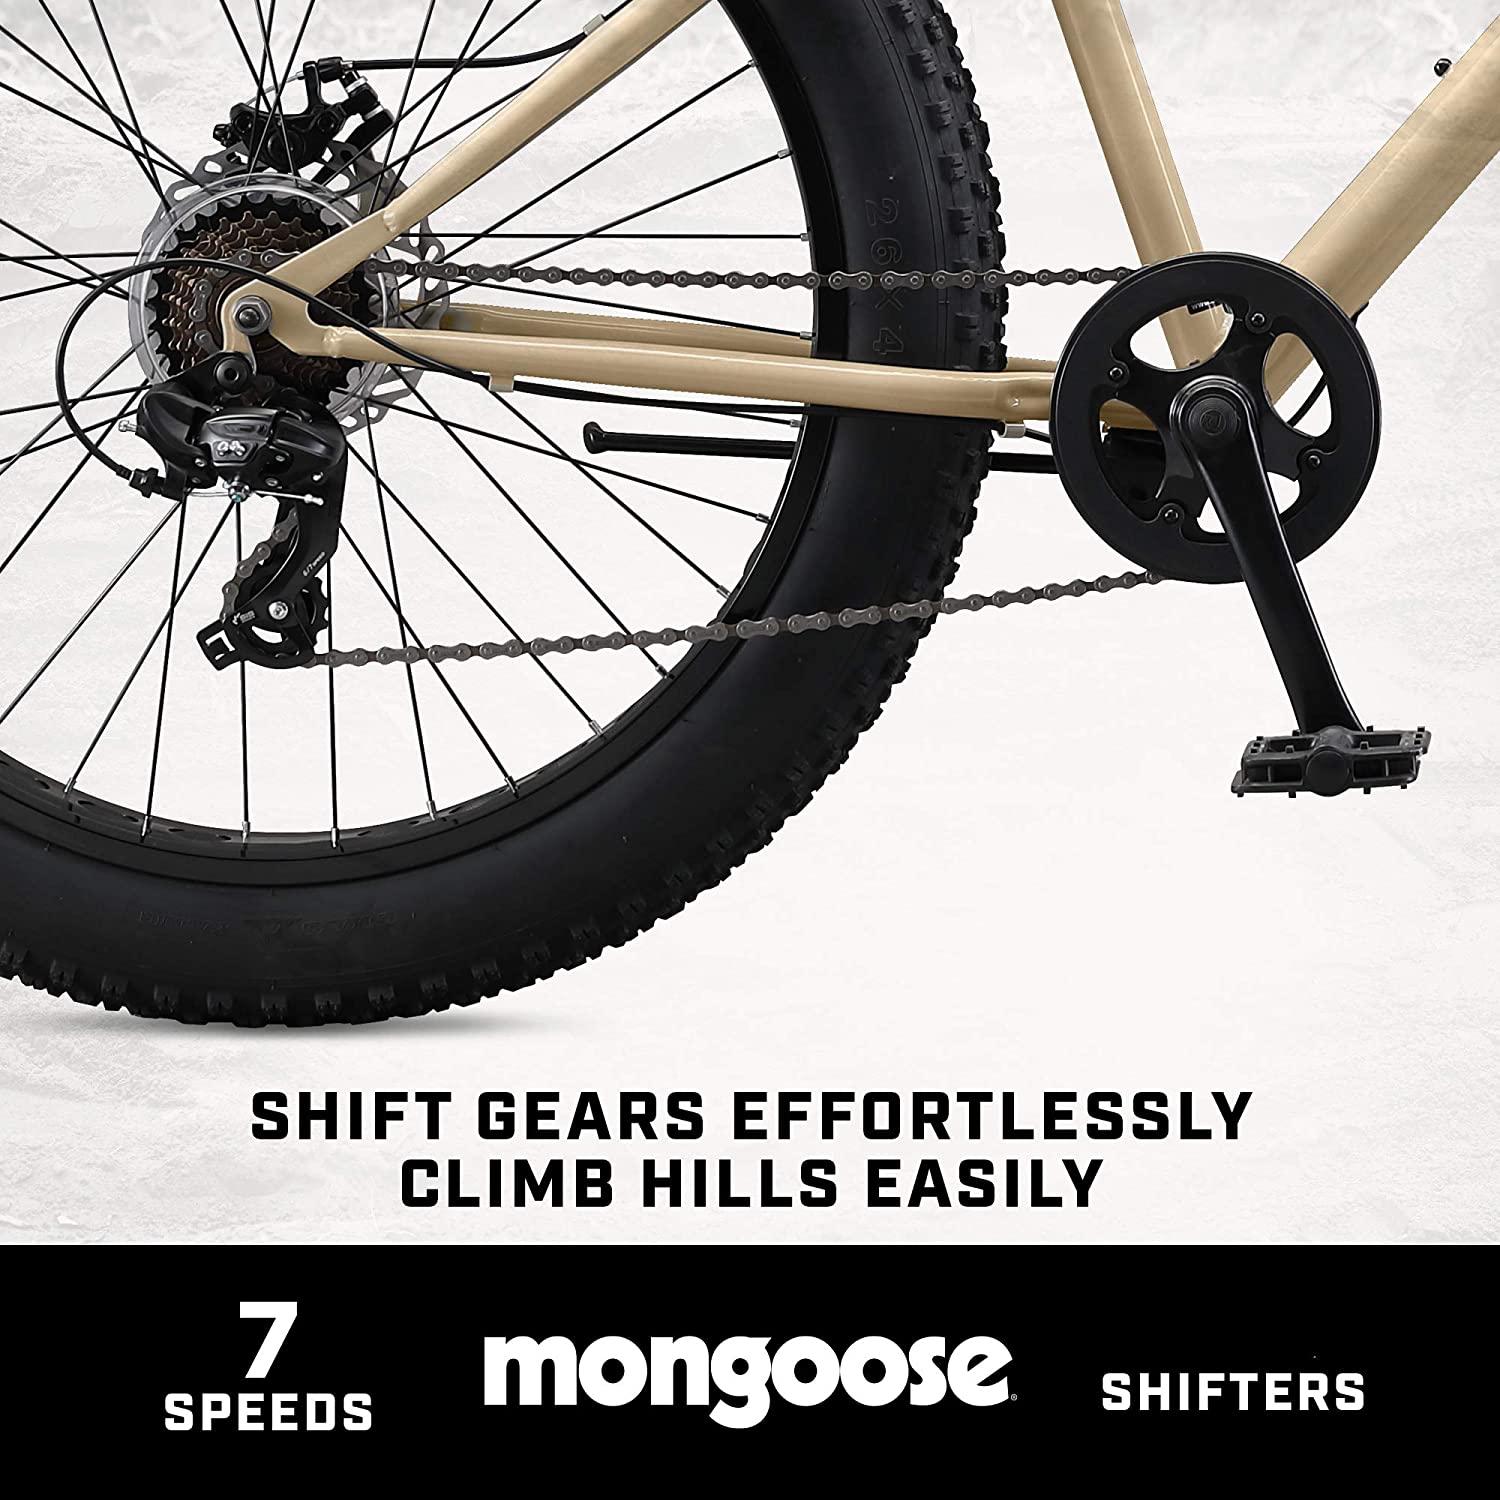 Mongoose 26 In. Malus Fat Tire Bicycle - image 5 of 7